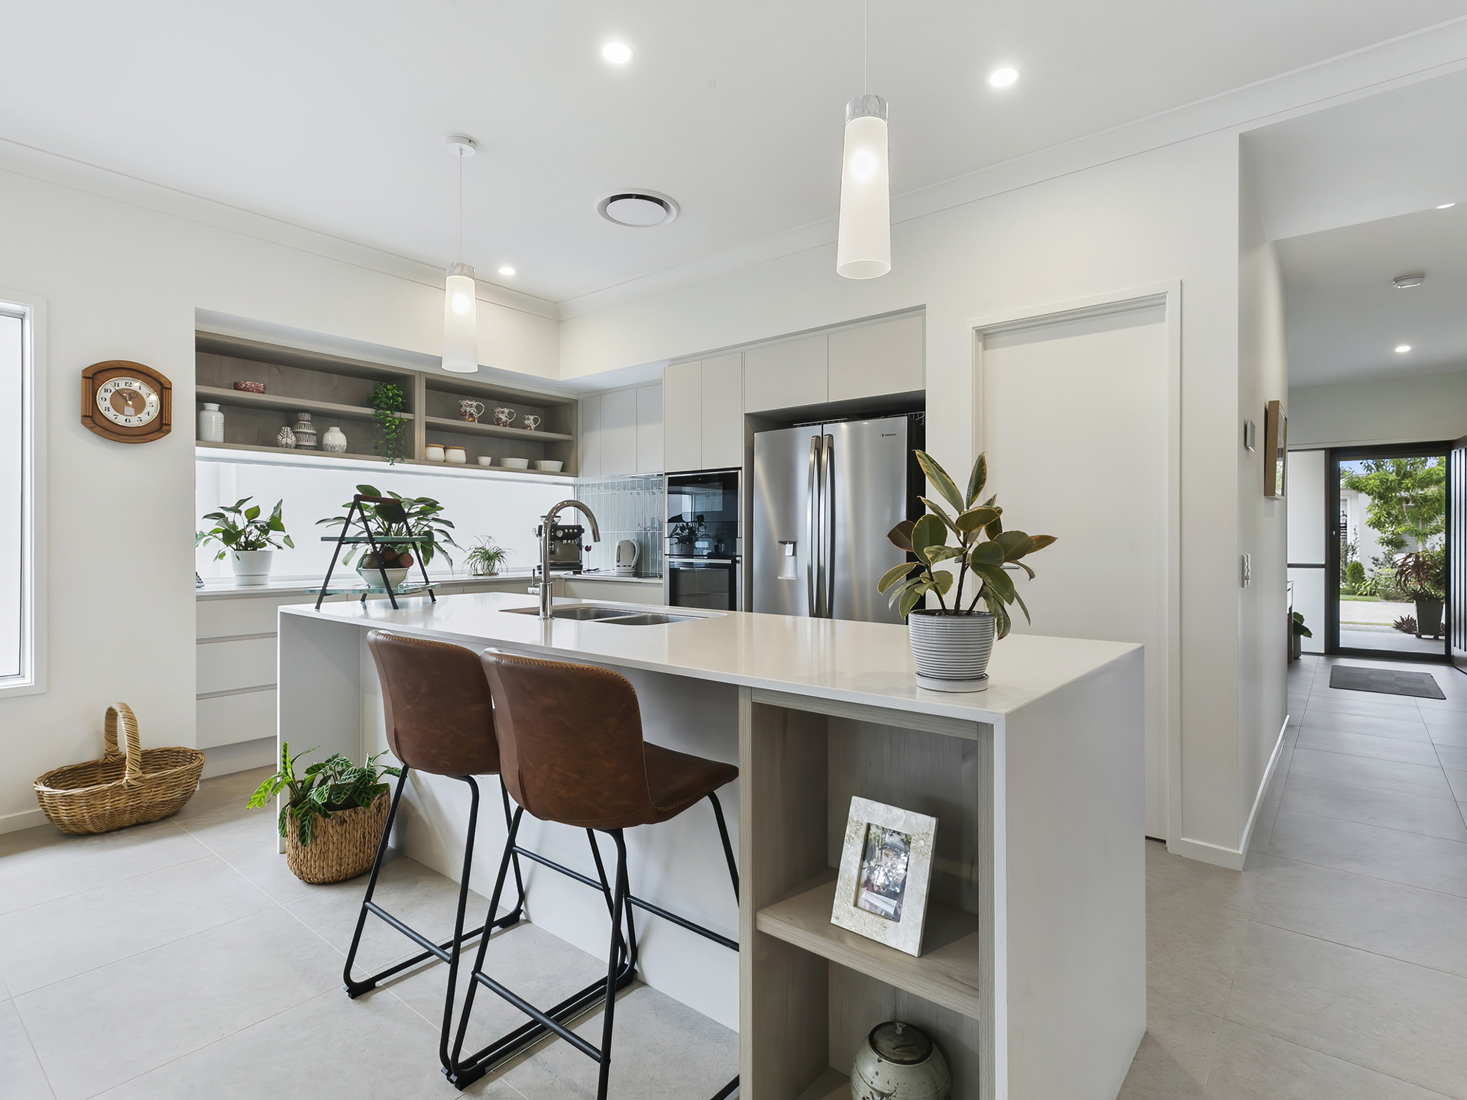 interior image of a modern white kitchen with tan bar stools and plant accents